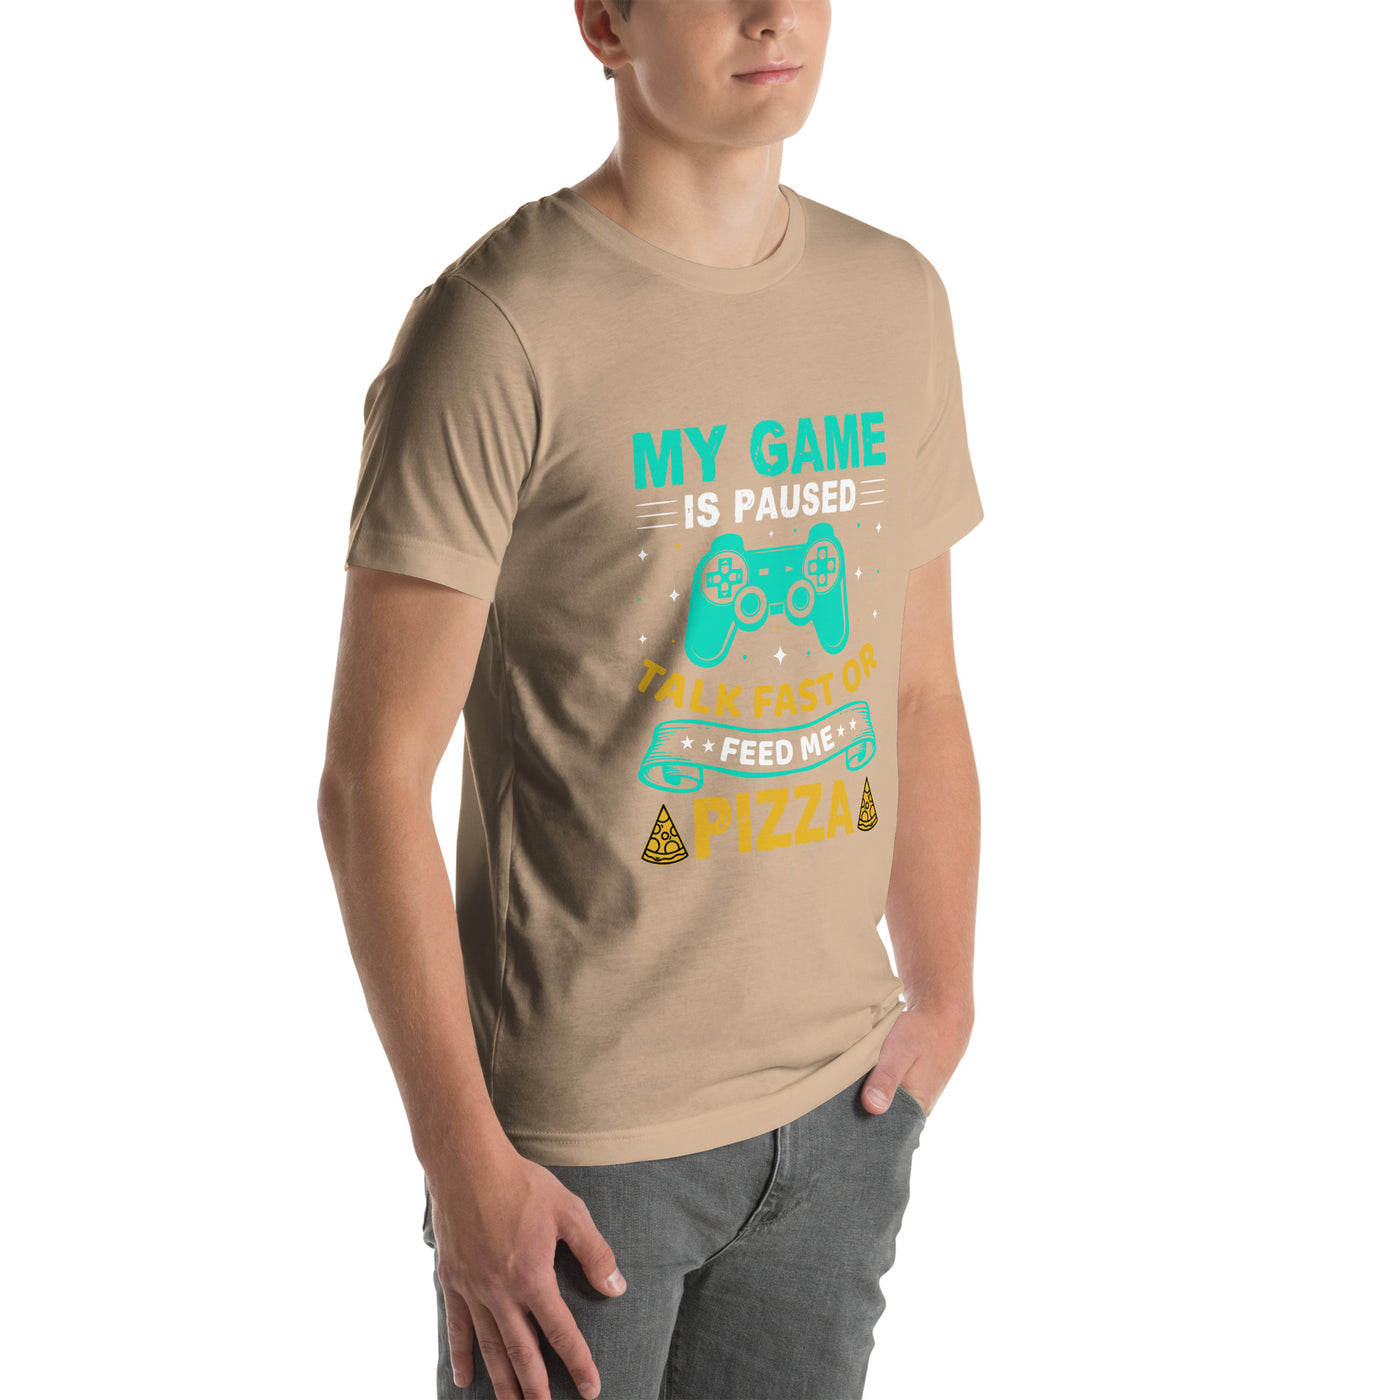 My Game is Paused, Talk Fast or Feed me Pizza - Unisex t-shirt